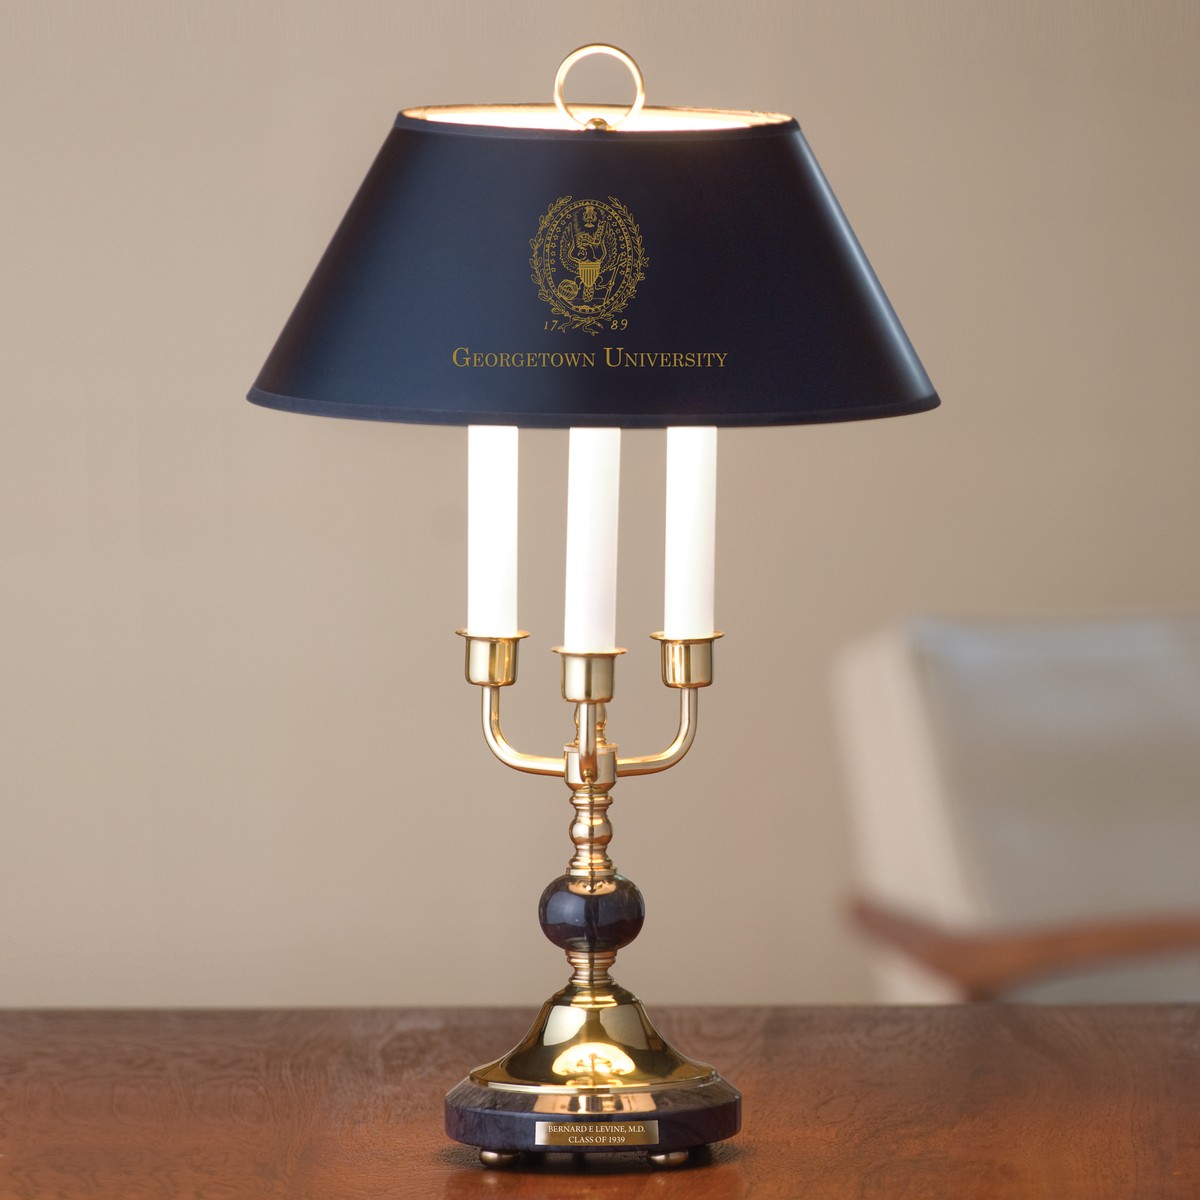 Traditional Georgetown University Lamp Graduation Gift Selection